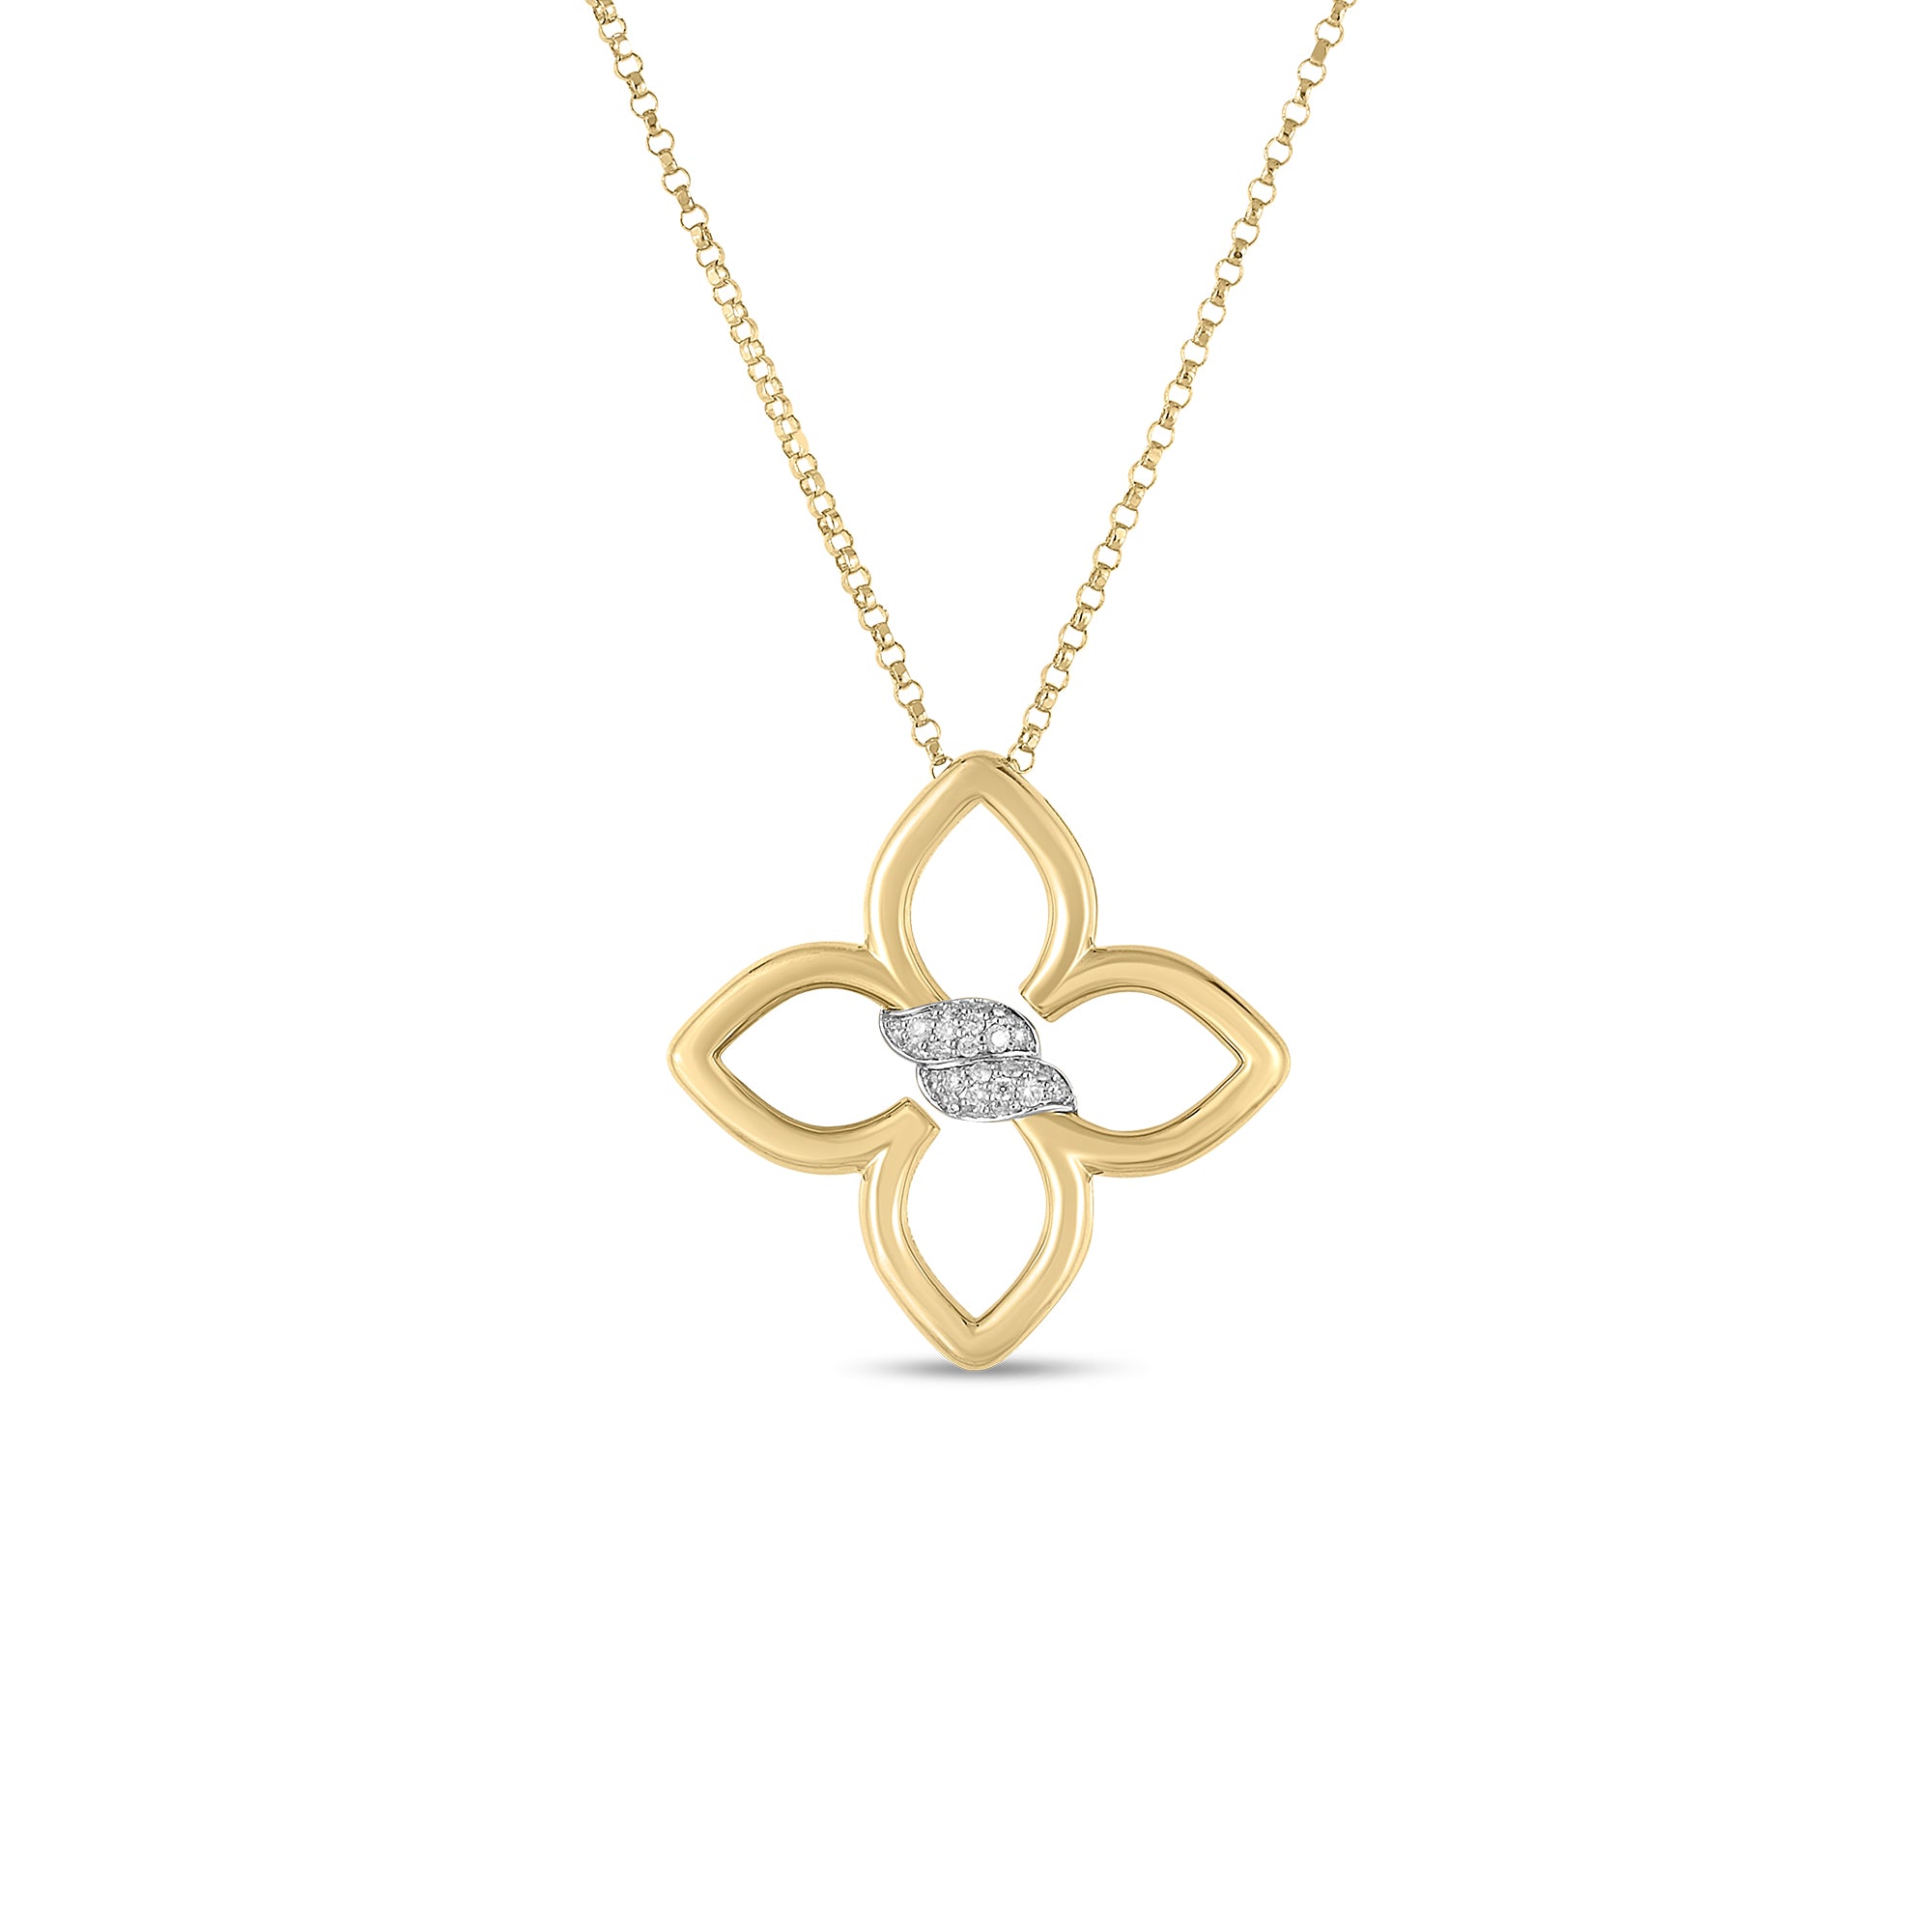 18K YELLOW GOLD AND DIAMOND CIALOMA FLOWER NECKLACE